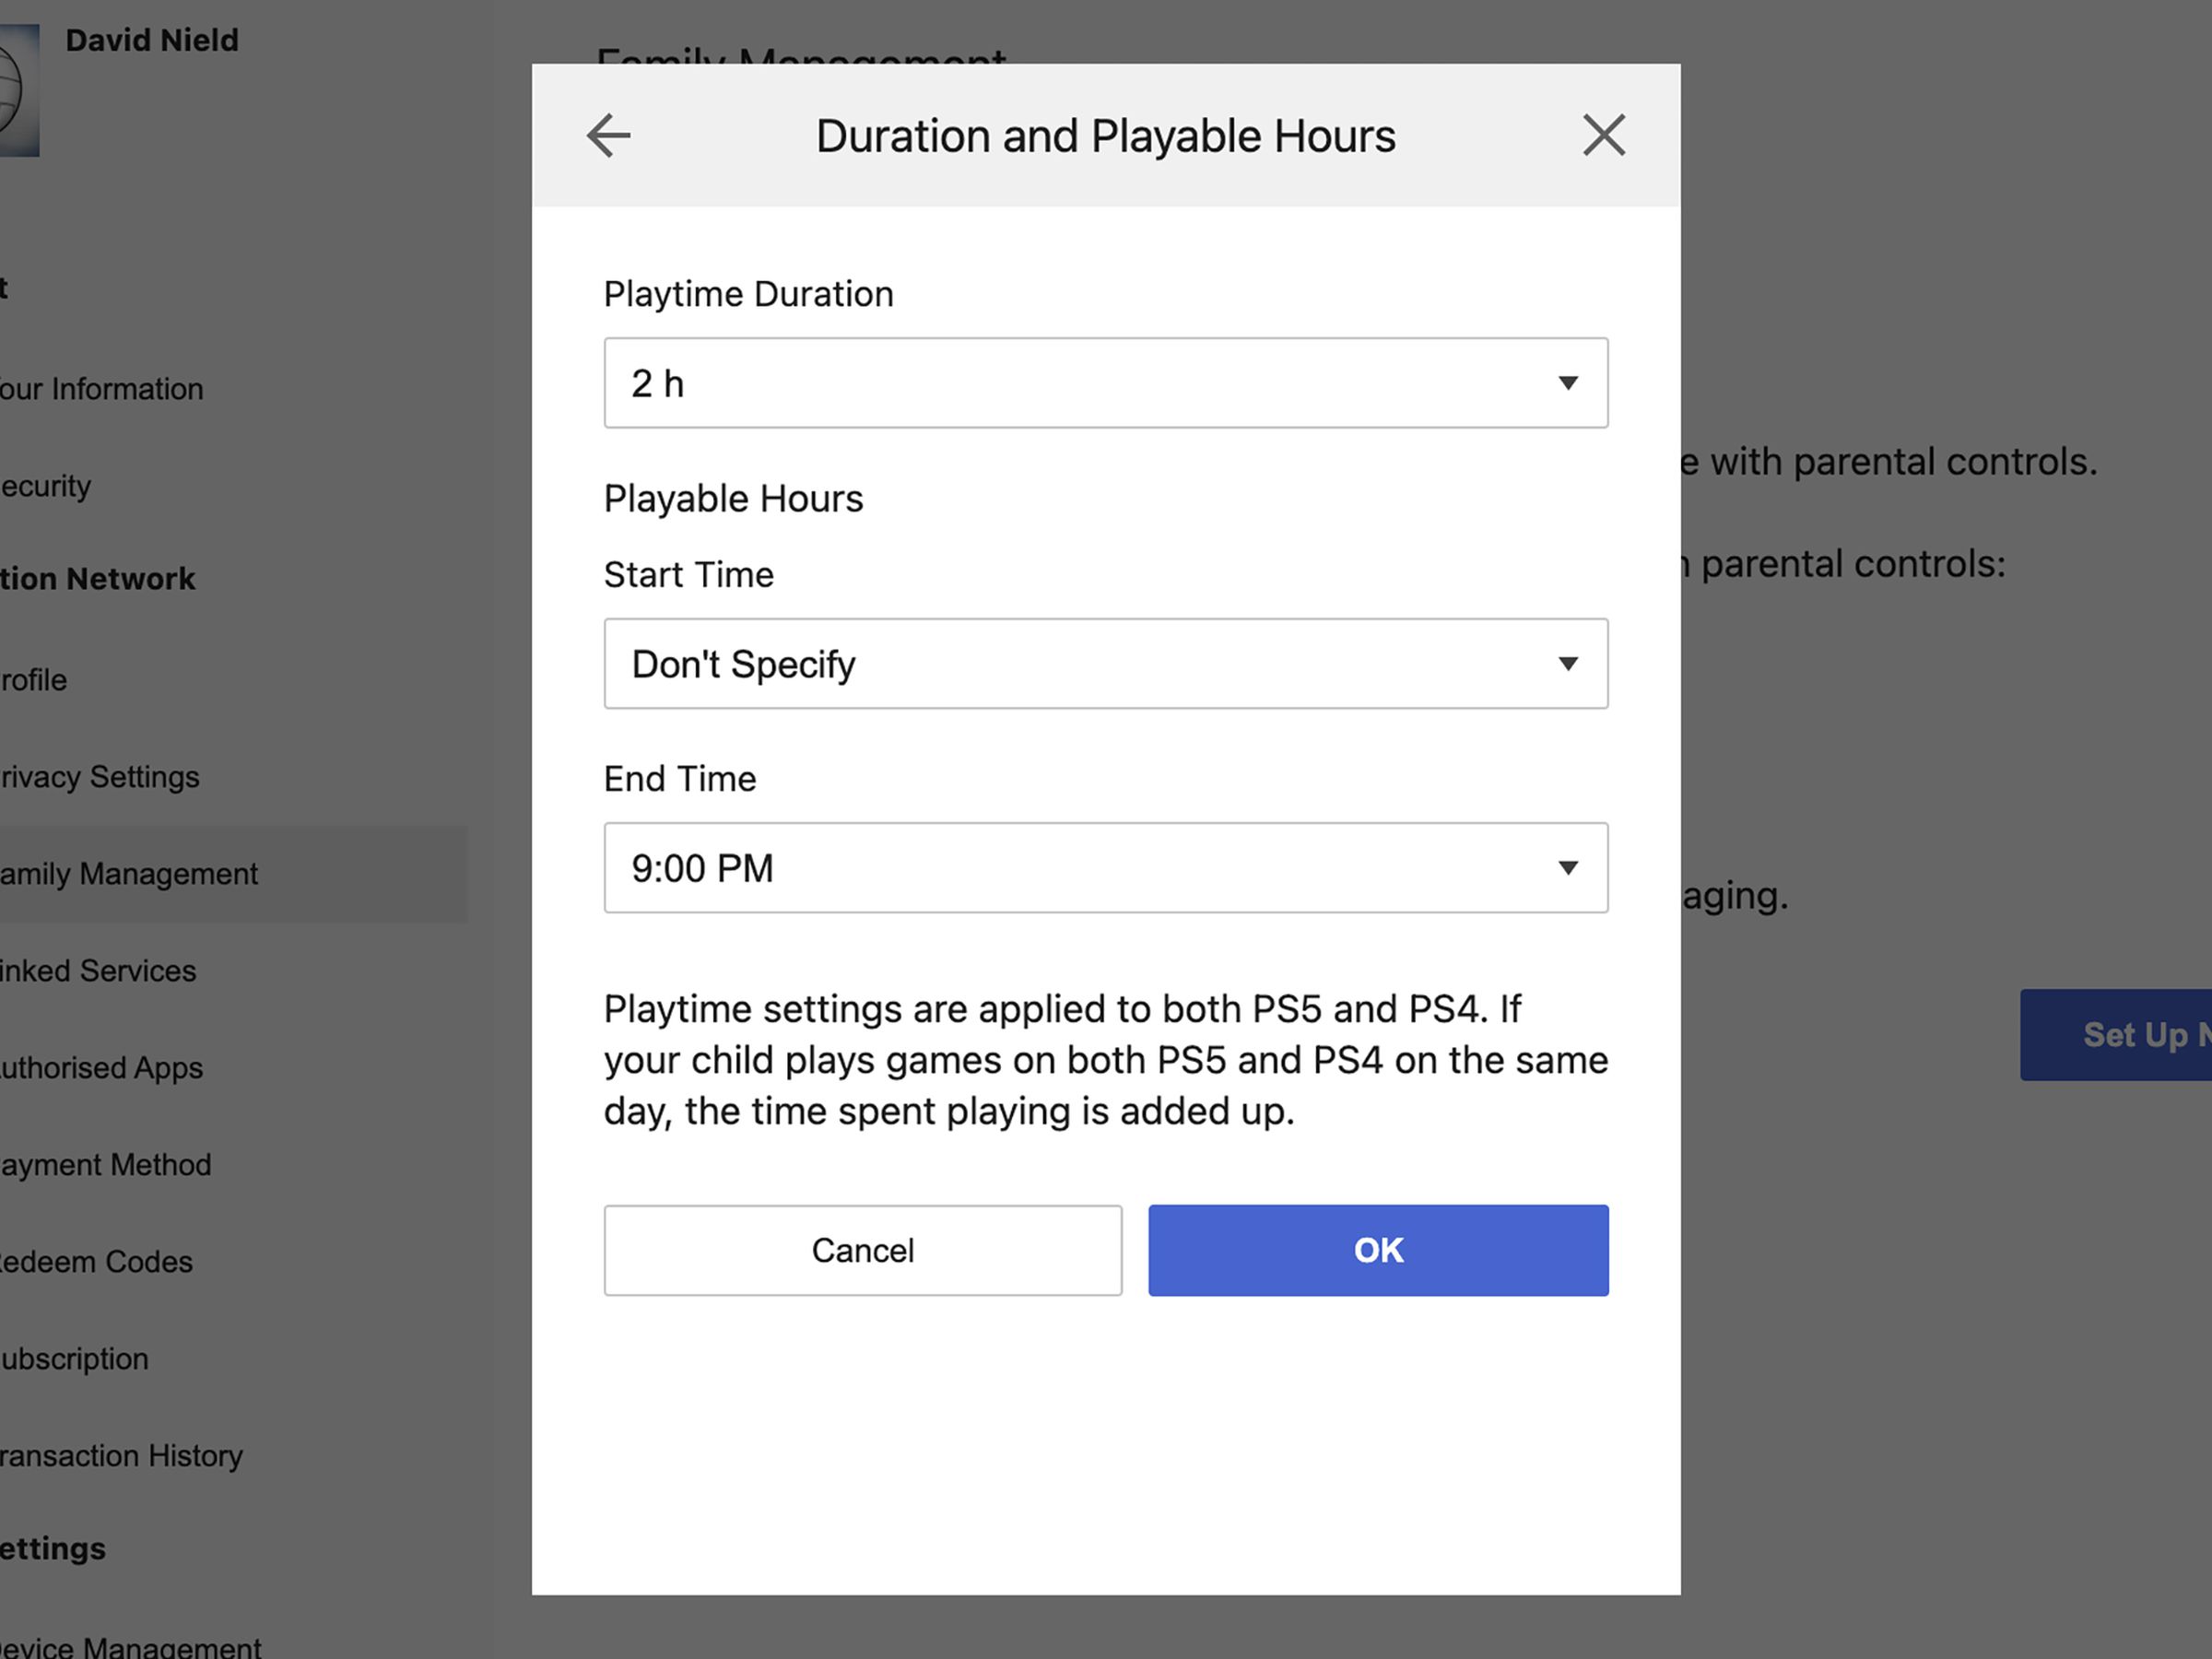 Page with Duration and Playable Hours, with drop down menus for Playtime Duration, Playable Hours (Start Time and End Time) and a blue OK button.